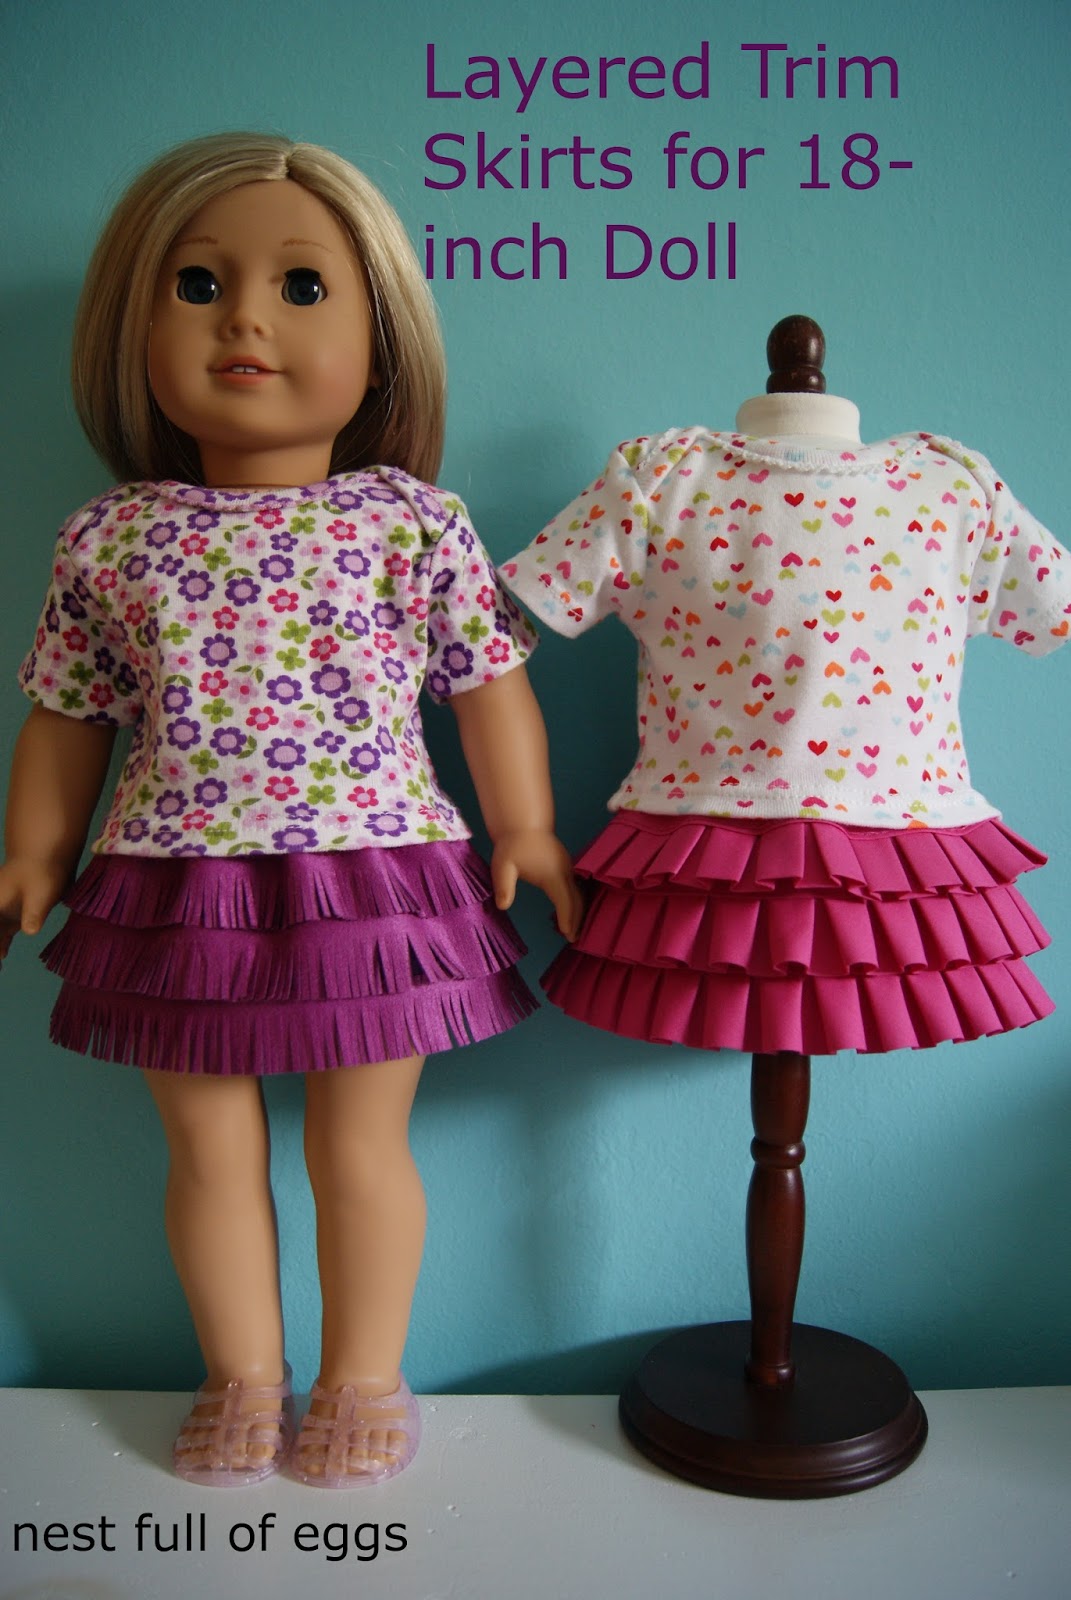 Layered trim skirts for 18-inch doll by nest full of eggs